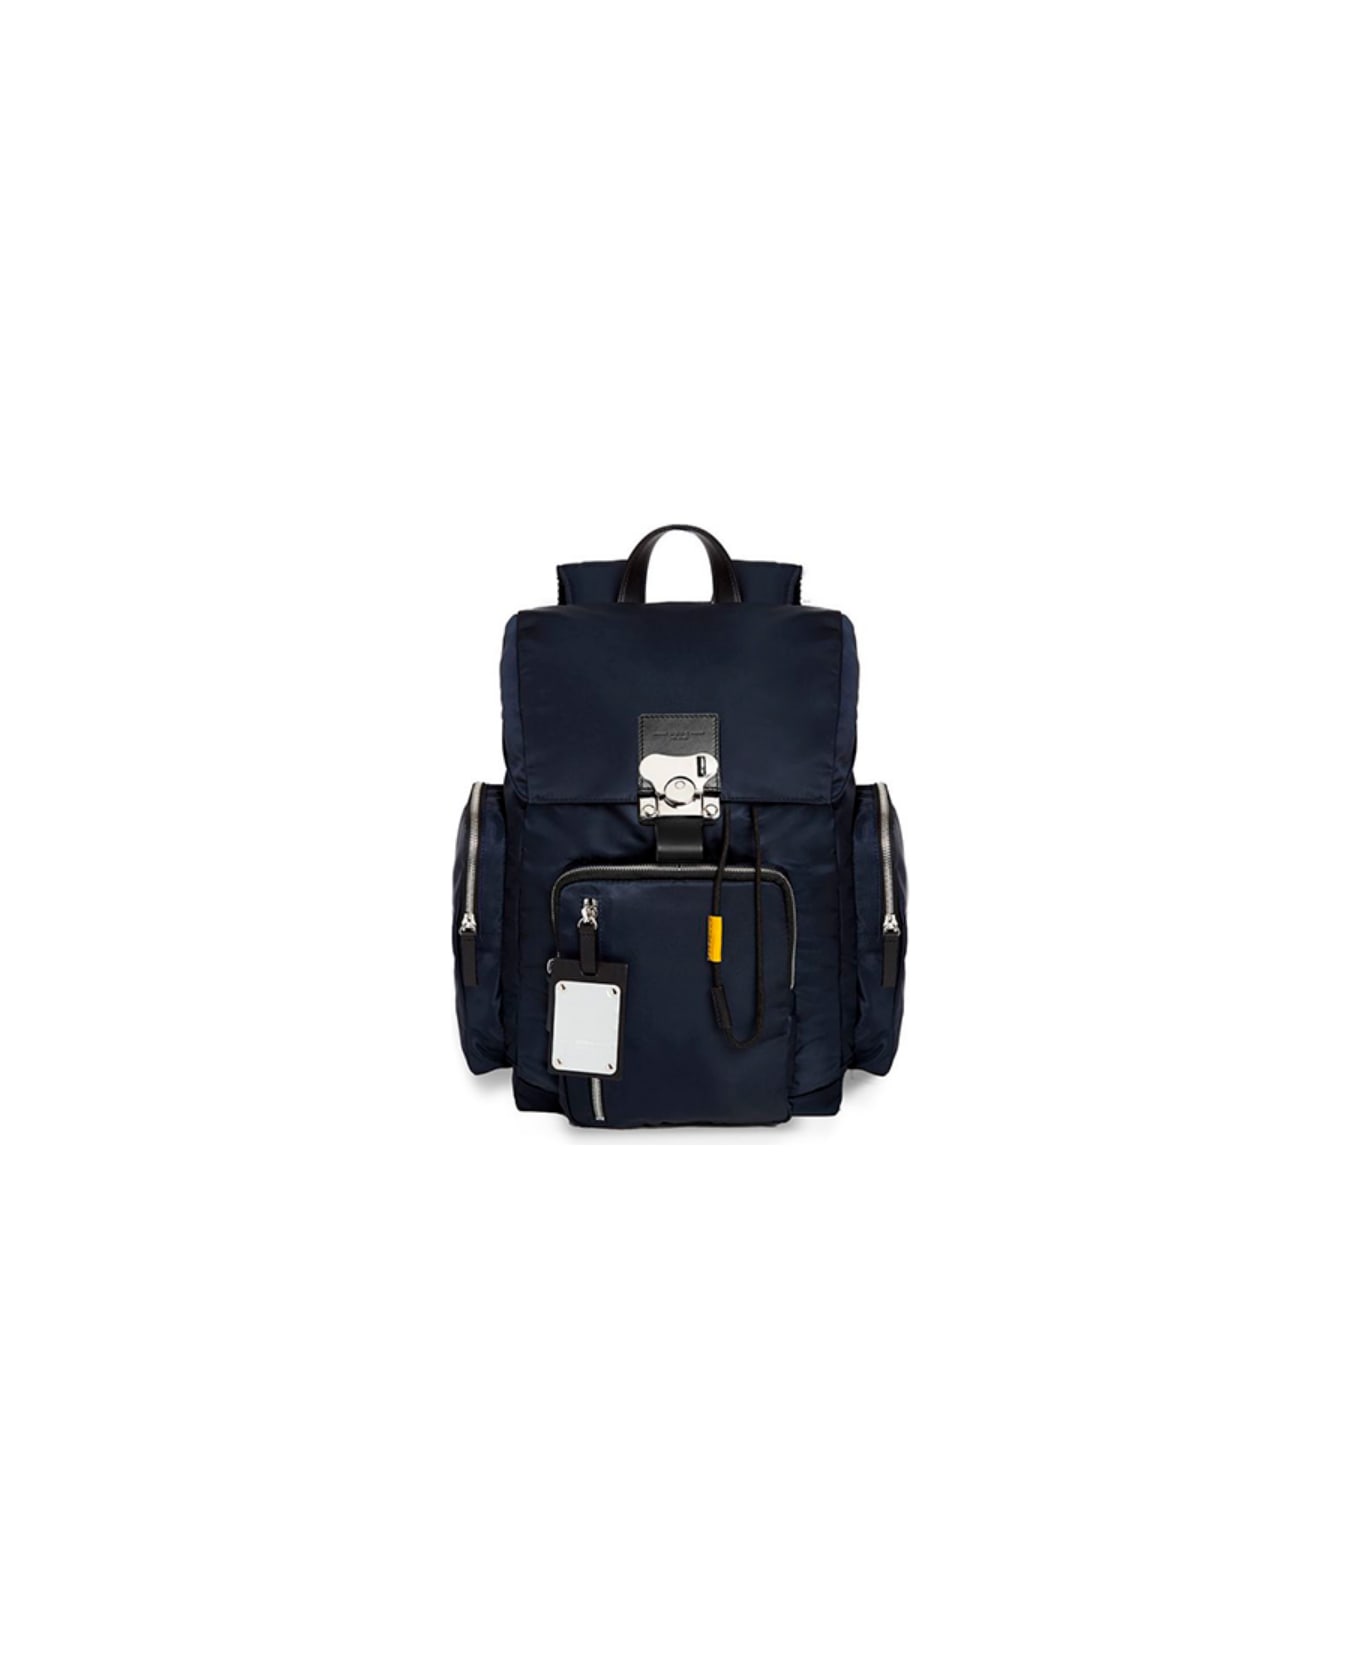 FPM Butterfly Pc Backpack M - Indigo Blue バックパック